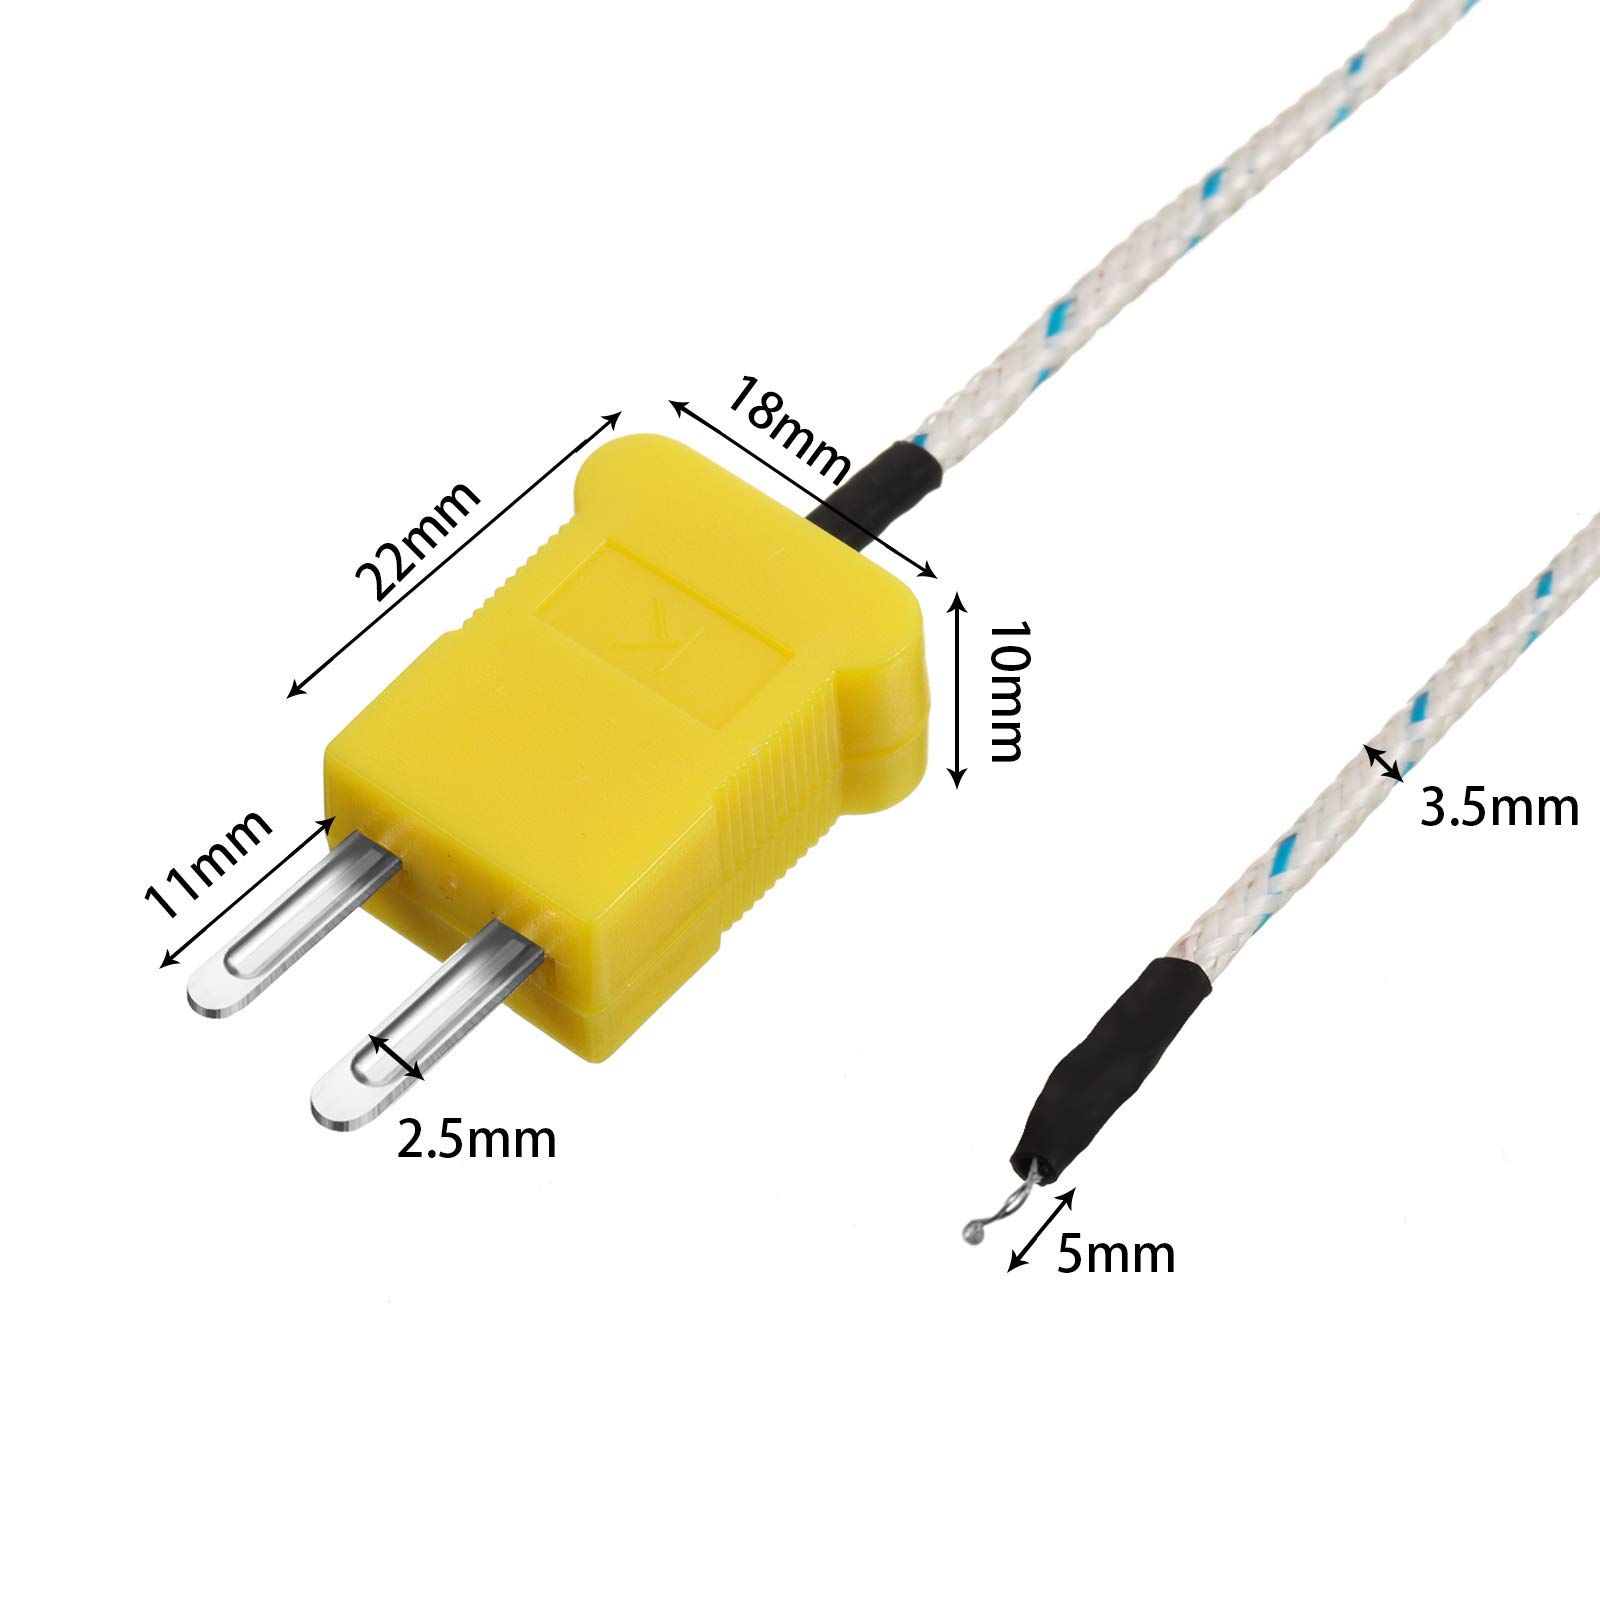 5 Pieces 3 Meters K Type Mini-Connector Thermocouple Temperature Probe Sensor K Type Thermocouple Wire Temperature Sensing Line Measure Range -50 to 400 Celsius, Compatible with TM902C/ TES1310